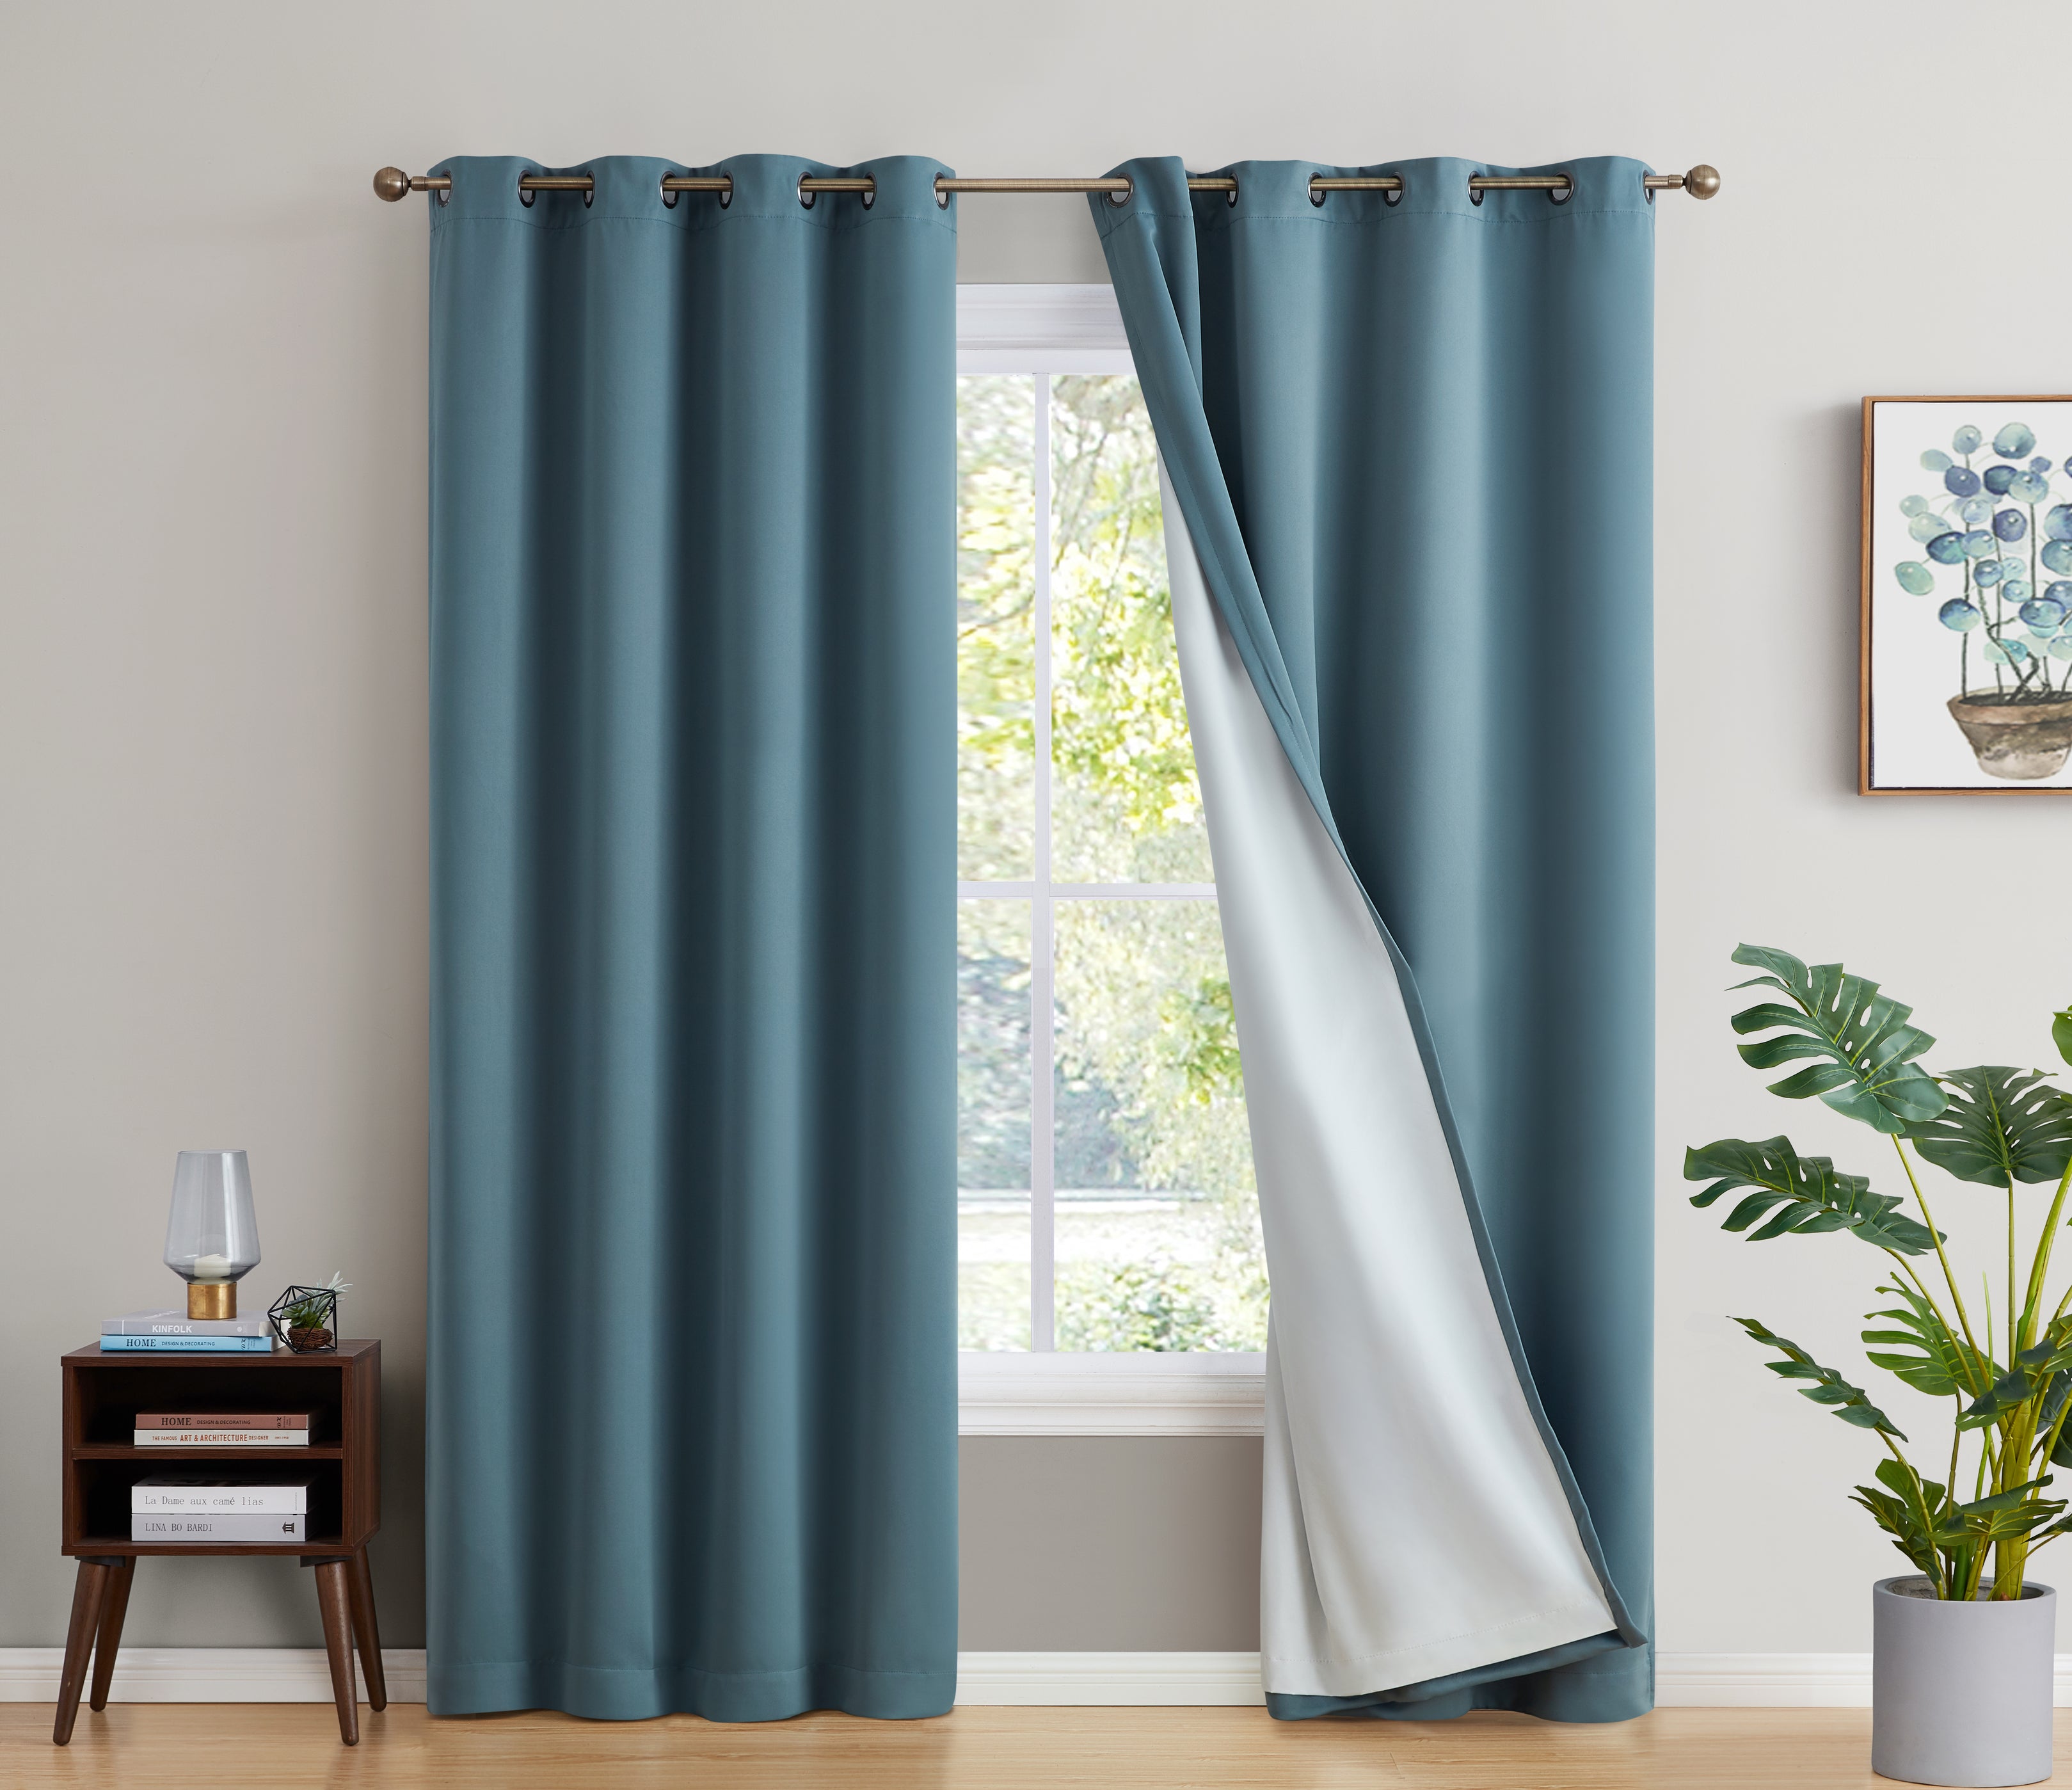 100% Blackout Curtains with Insulight Membrane